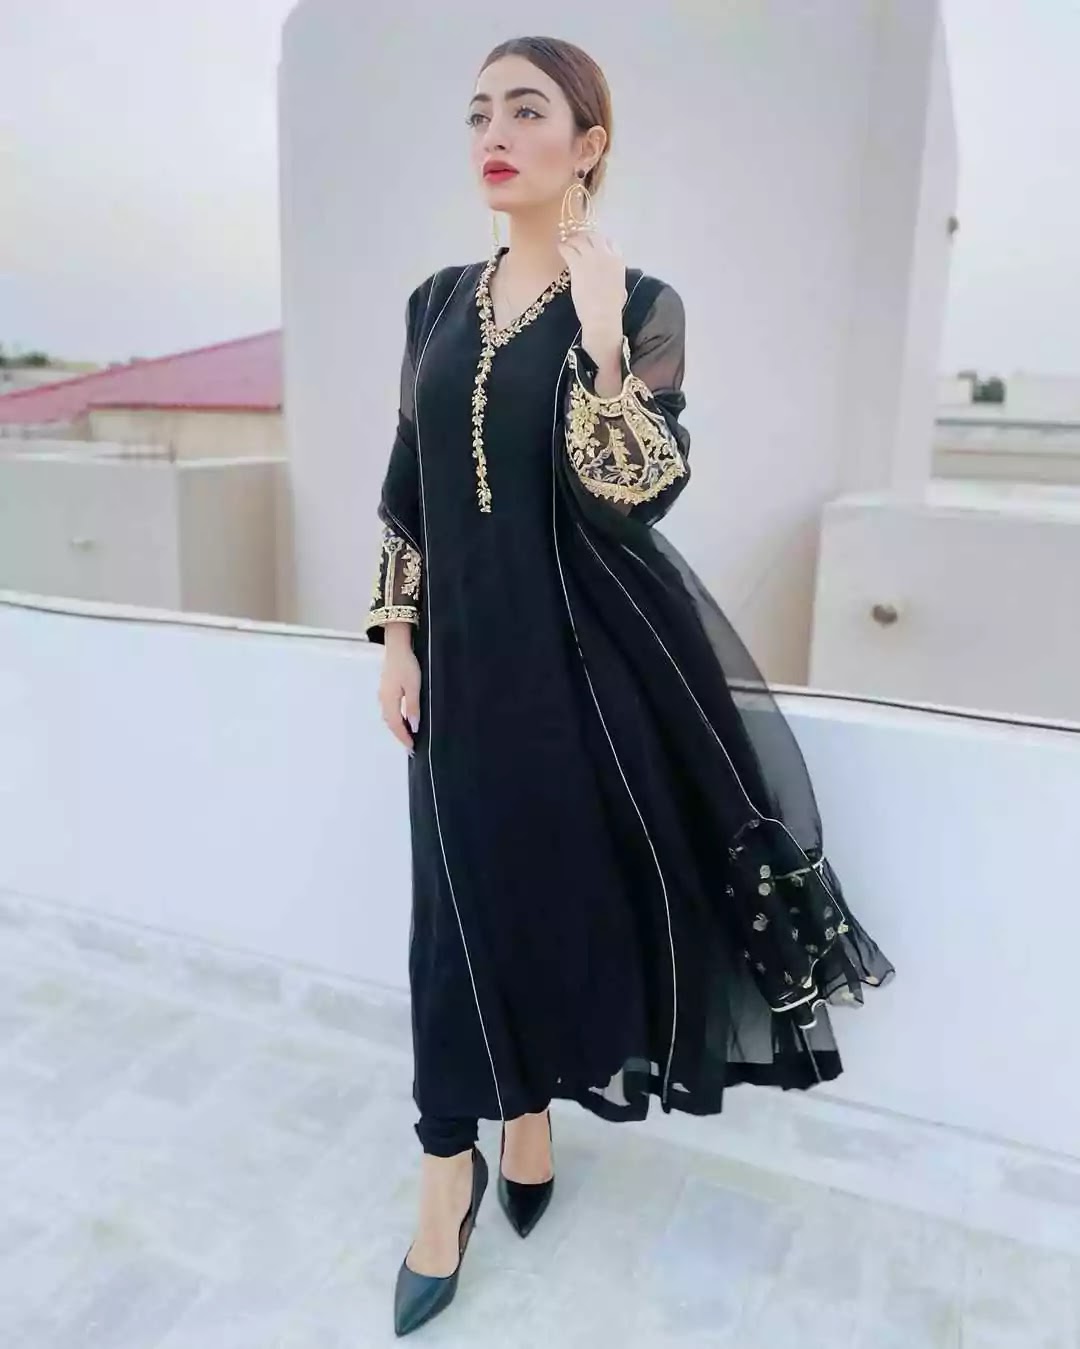 Beautiful Pictures of Nawal Saeed Wearing Black Frock